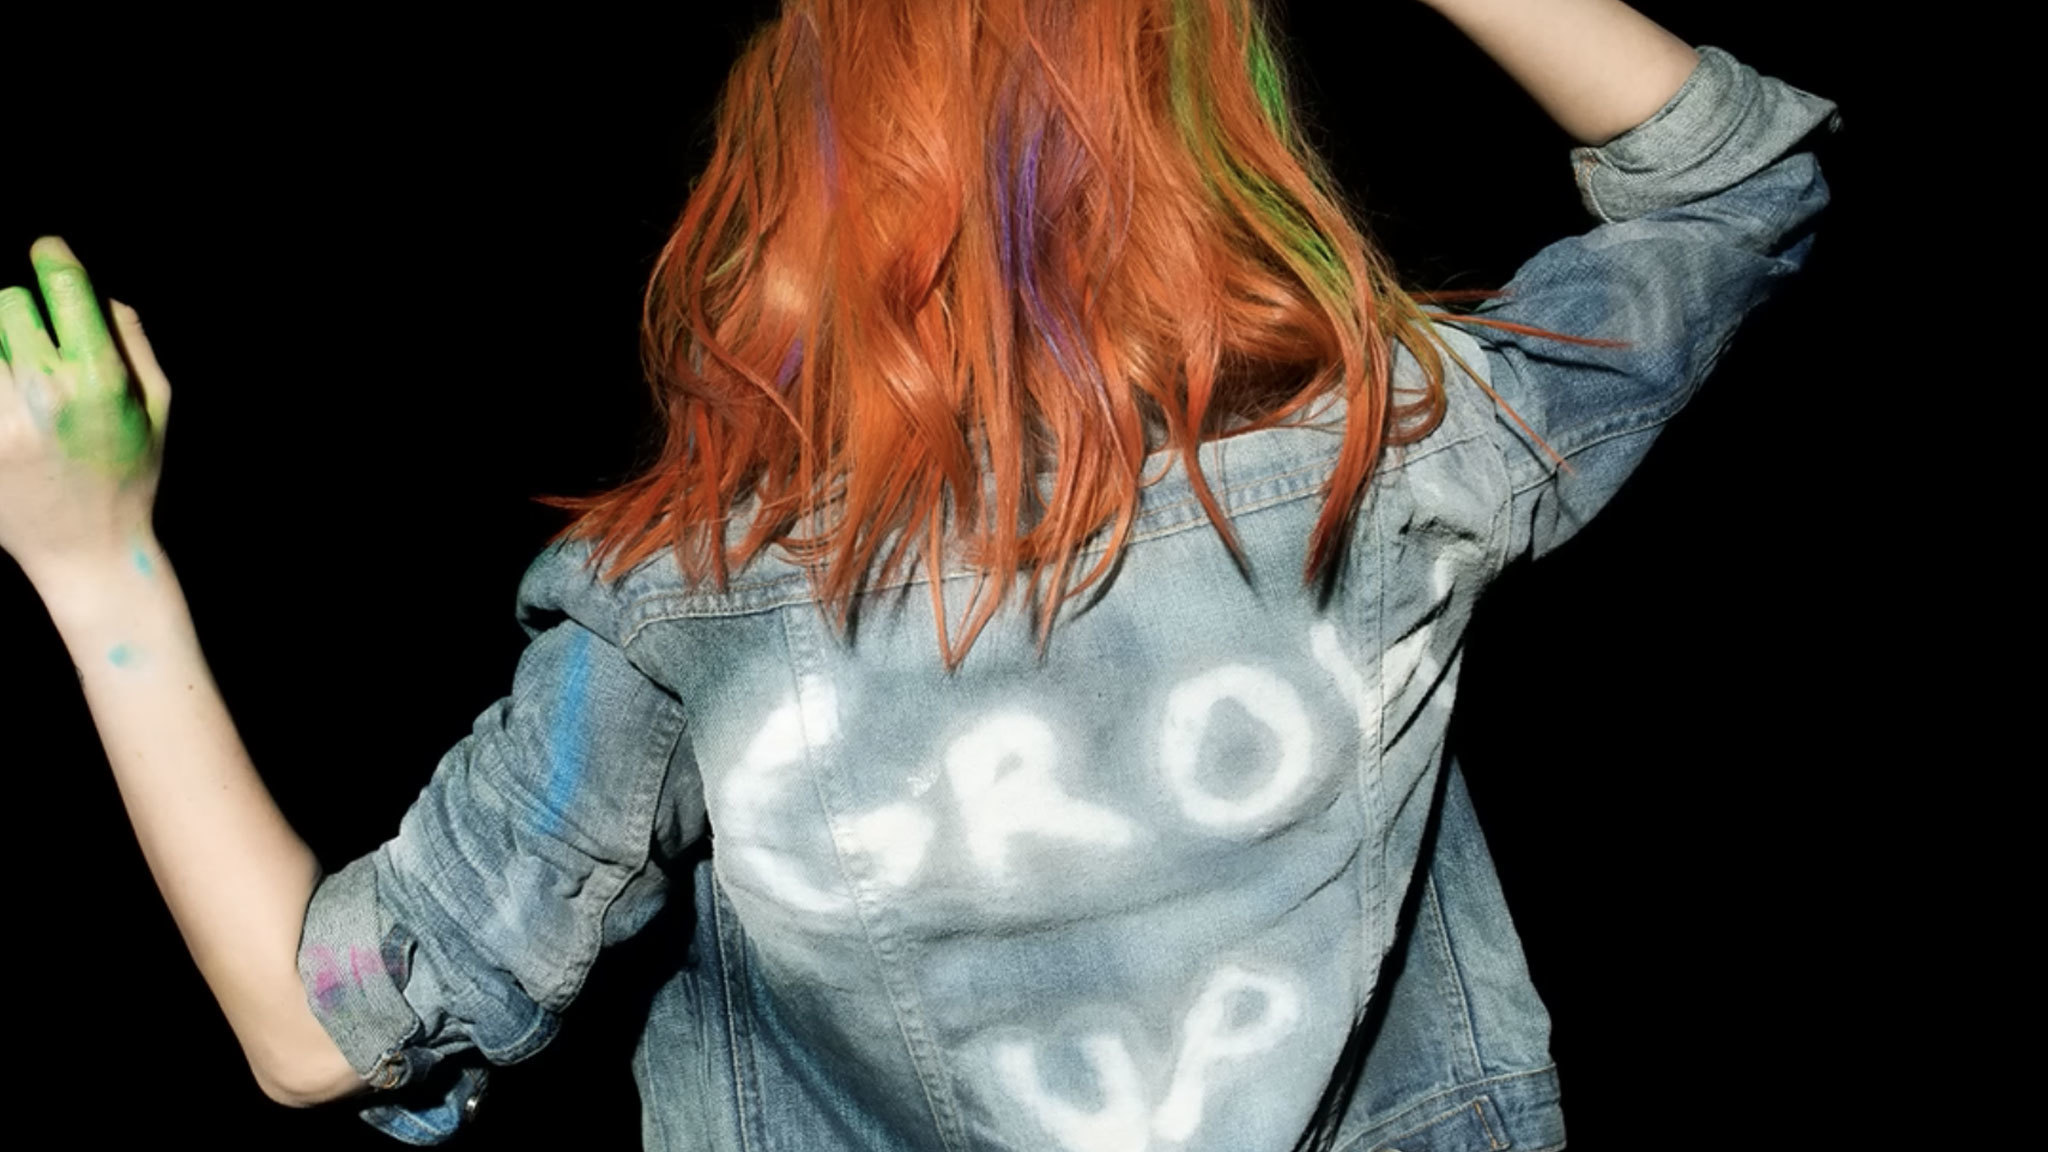 Paramore have changed their 2013 self-titled album cover